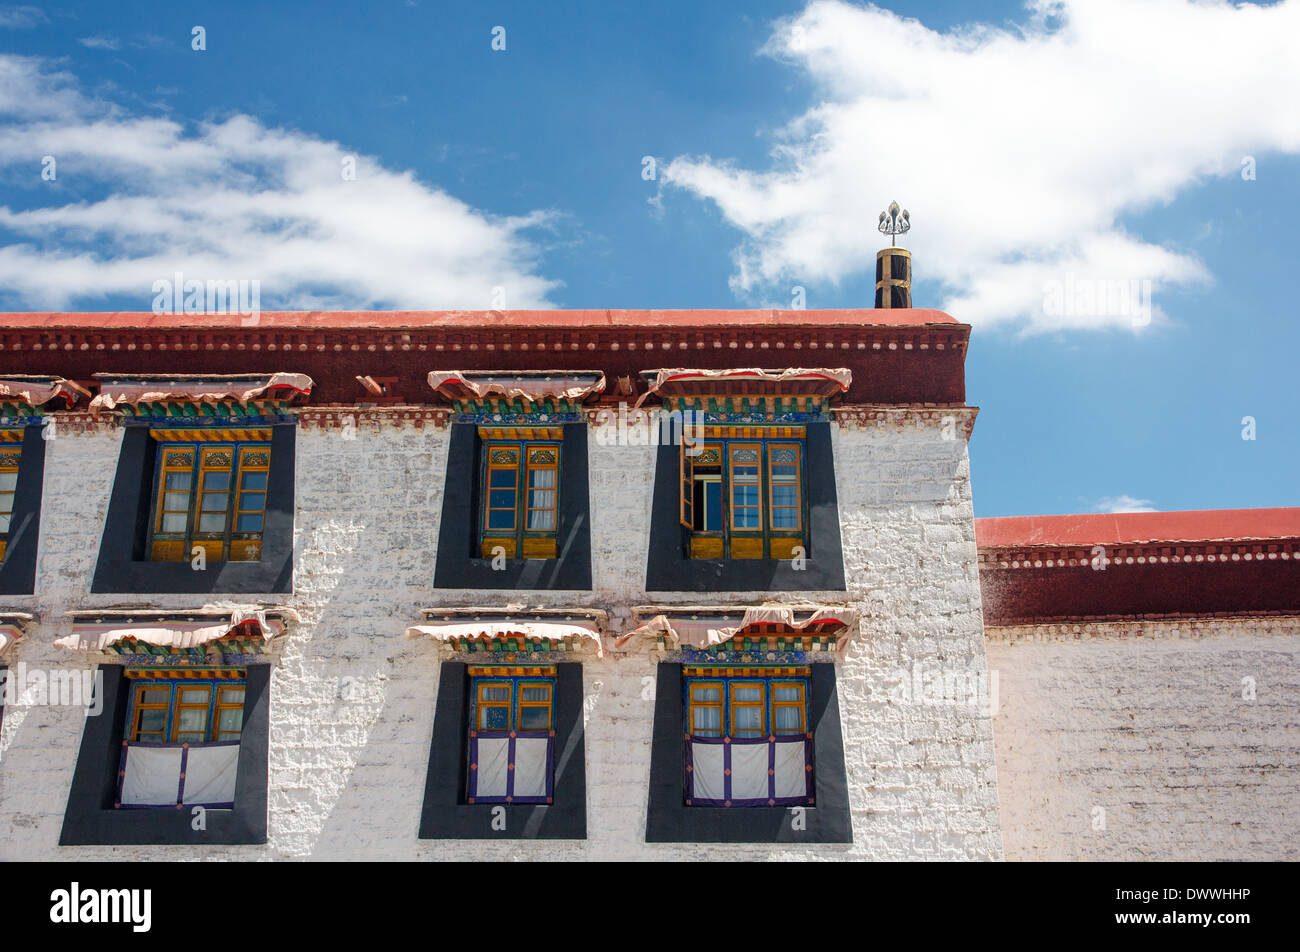 Typical Tibetan architecture in Lhasa, Tibet. The wall is part of the more then 1300 years old Jokhang Temple Stock Photo